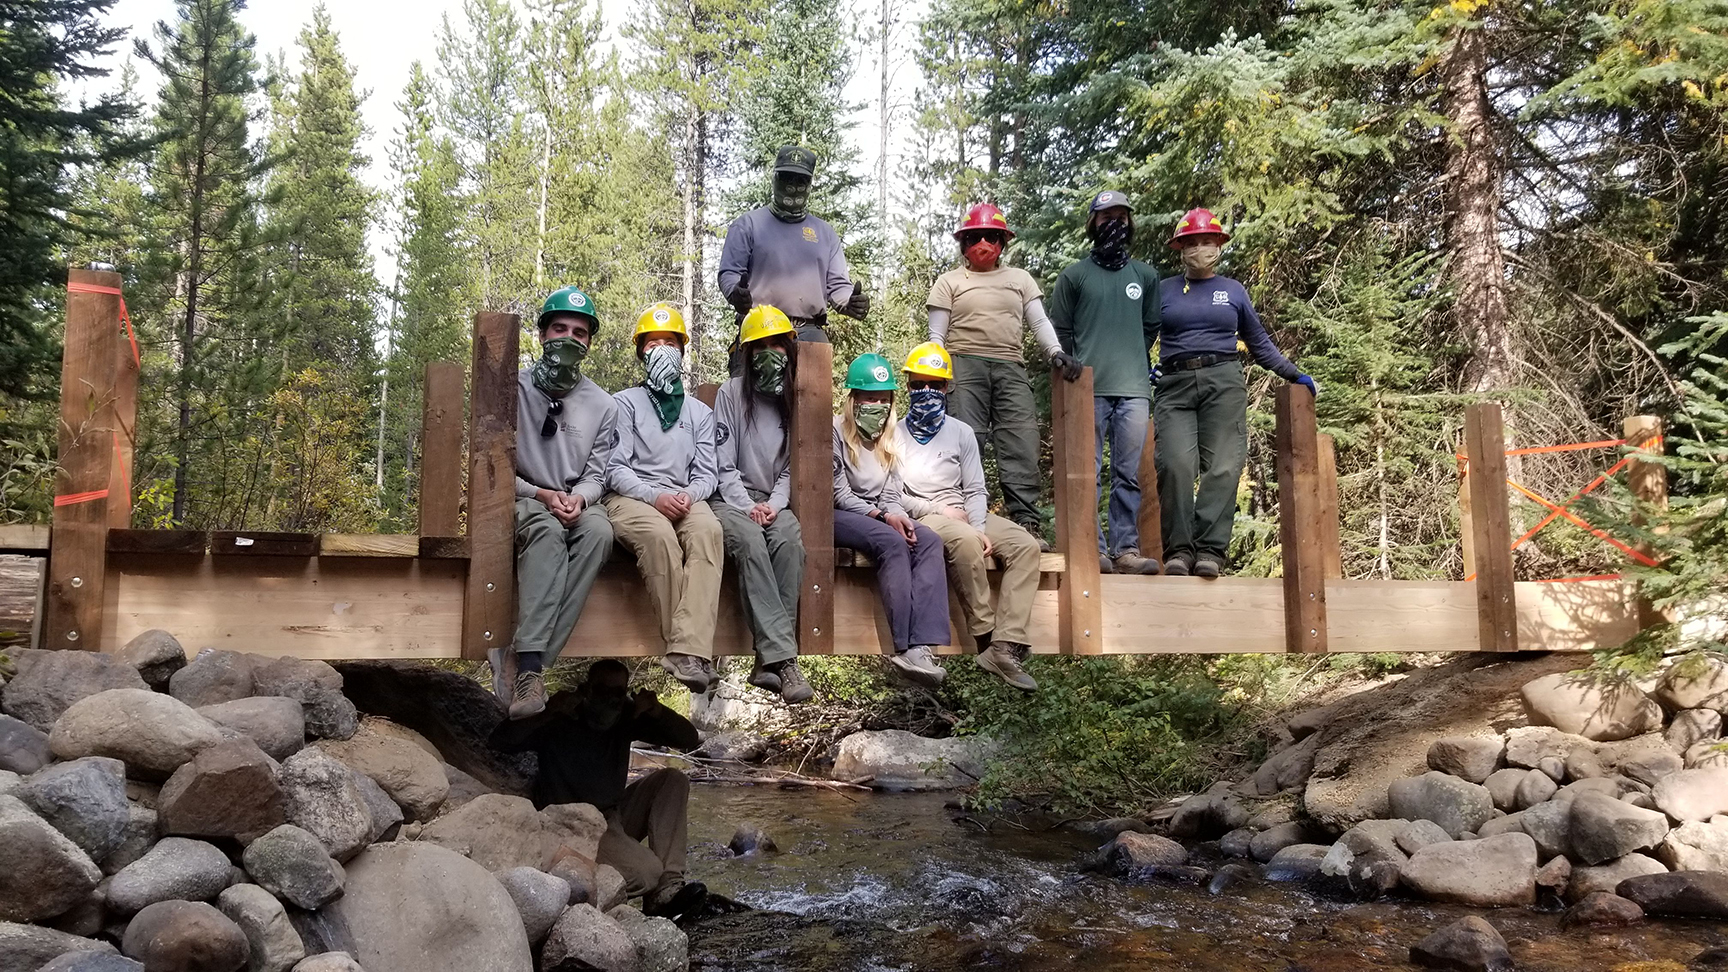 A group of people posing on a wooden bridge.